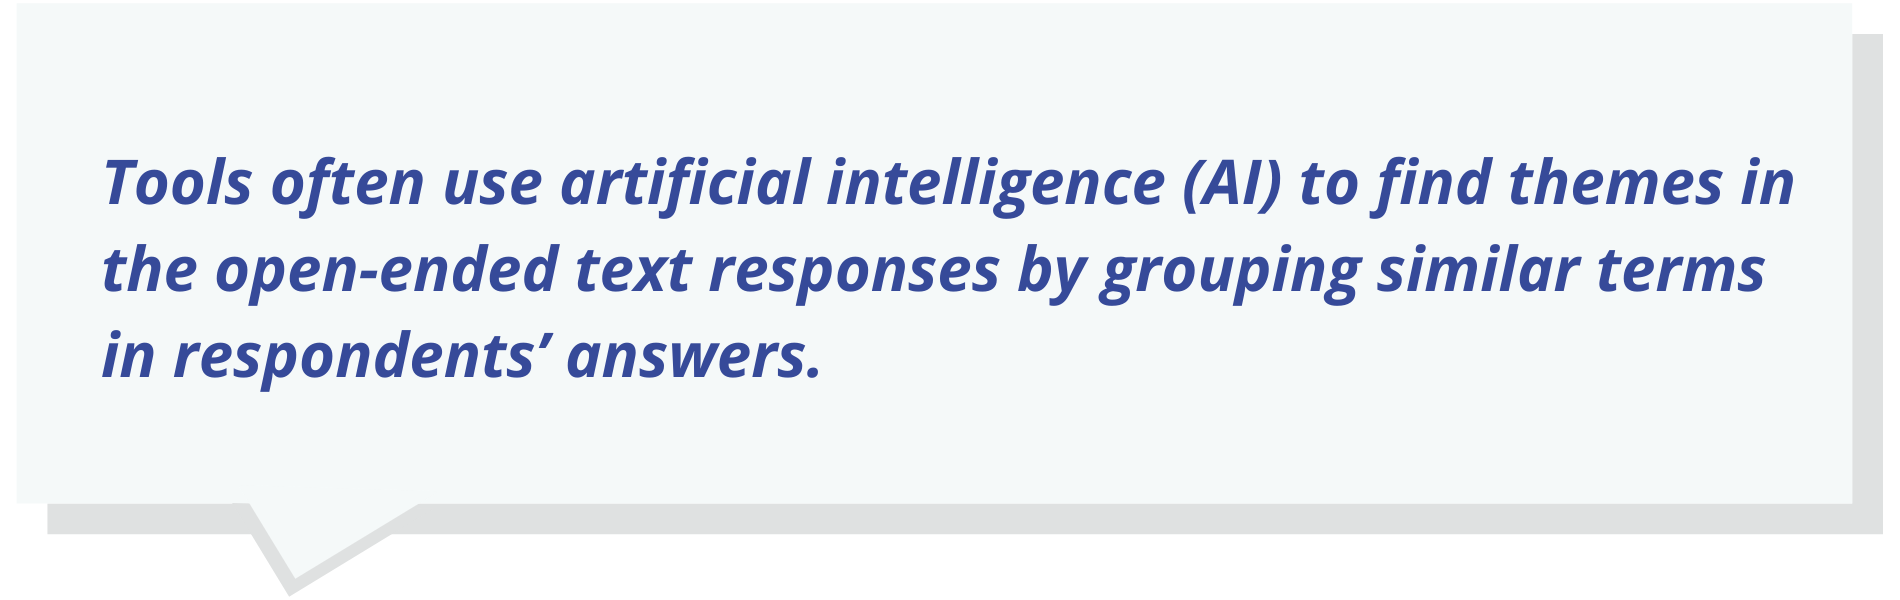 Tools often use artificial intelligence (AI) to find themes in the open-ended text responses by grouping similar terms in respondents’ answers.